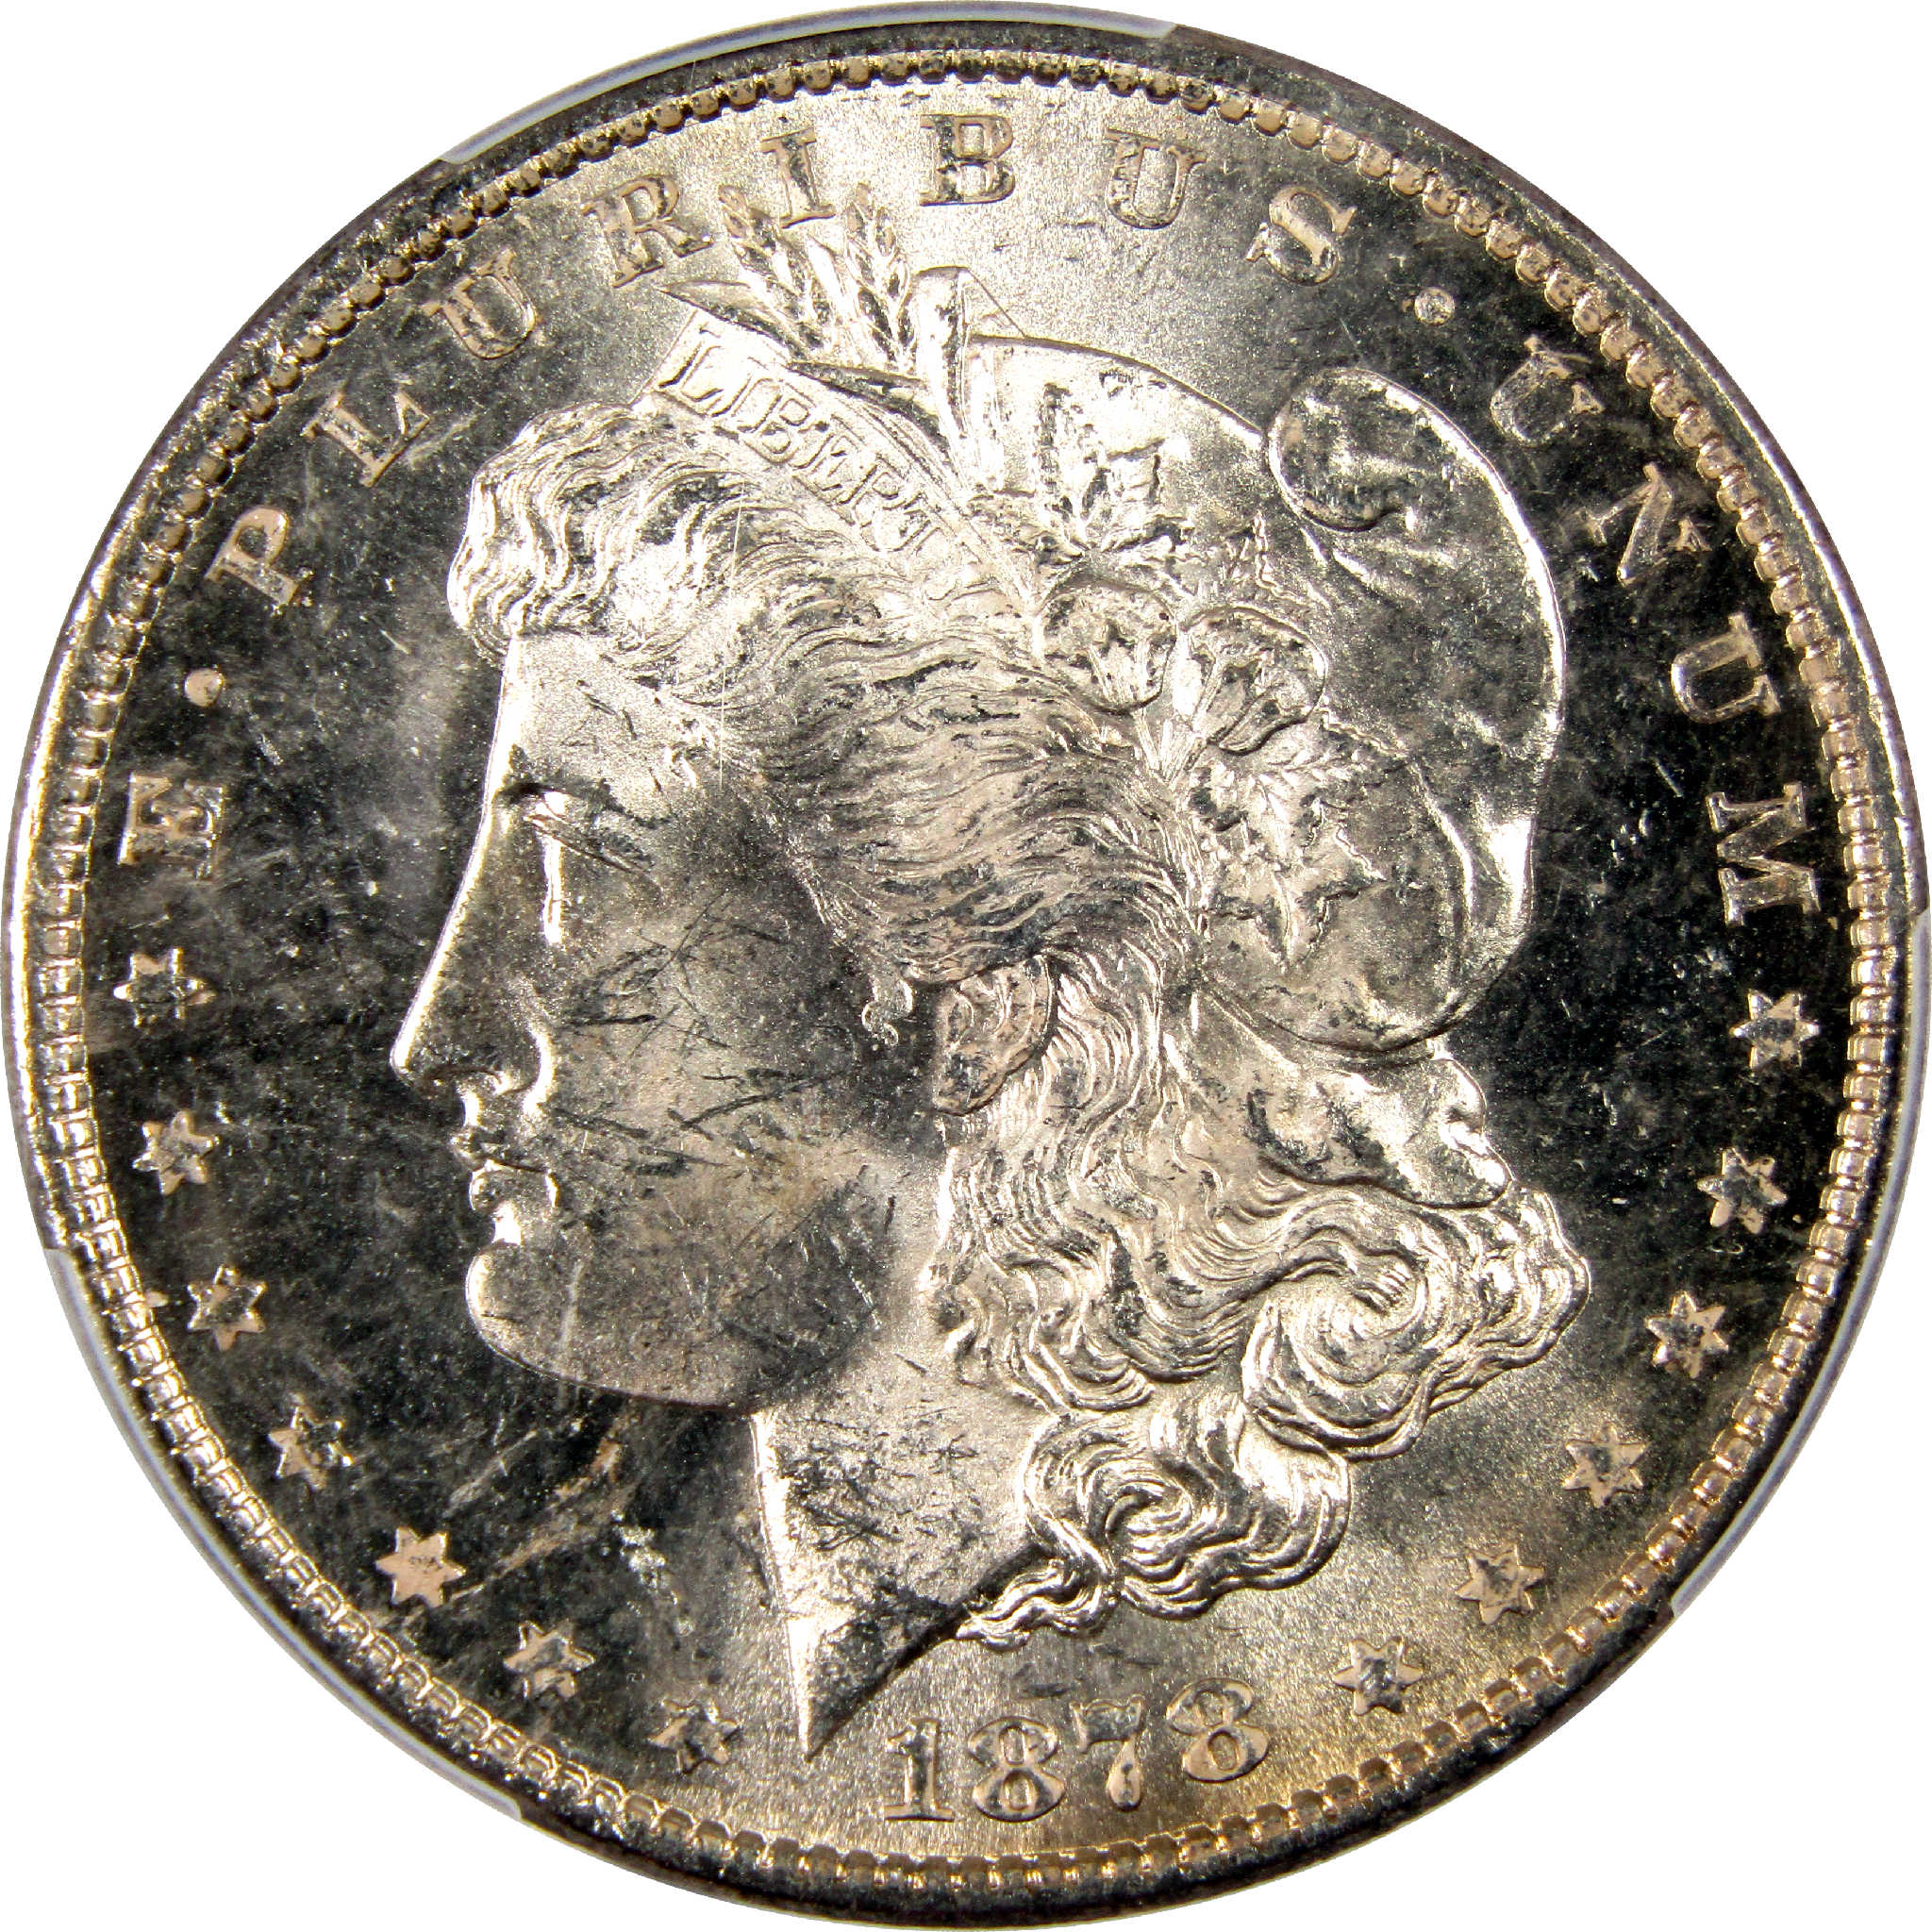 1878 7TF Rev 79 Morgan Dollar MS 62 PCGS Silver $1 Unc SKU:I11313 - Morgan coin - Morgan silver dollar - Morgan silver dollar for sale - Profile Coins &amp; Collectibles